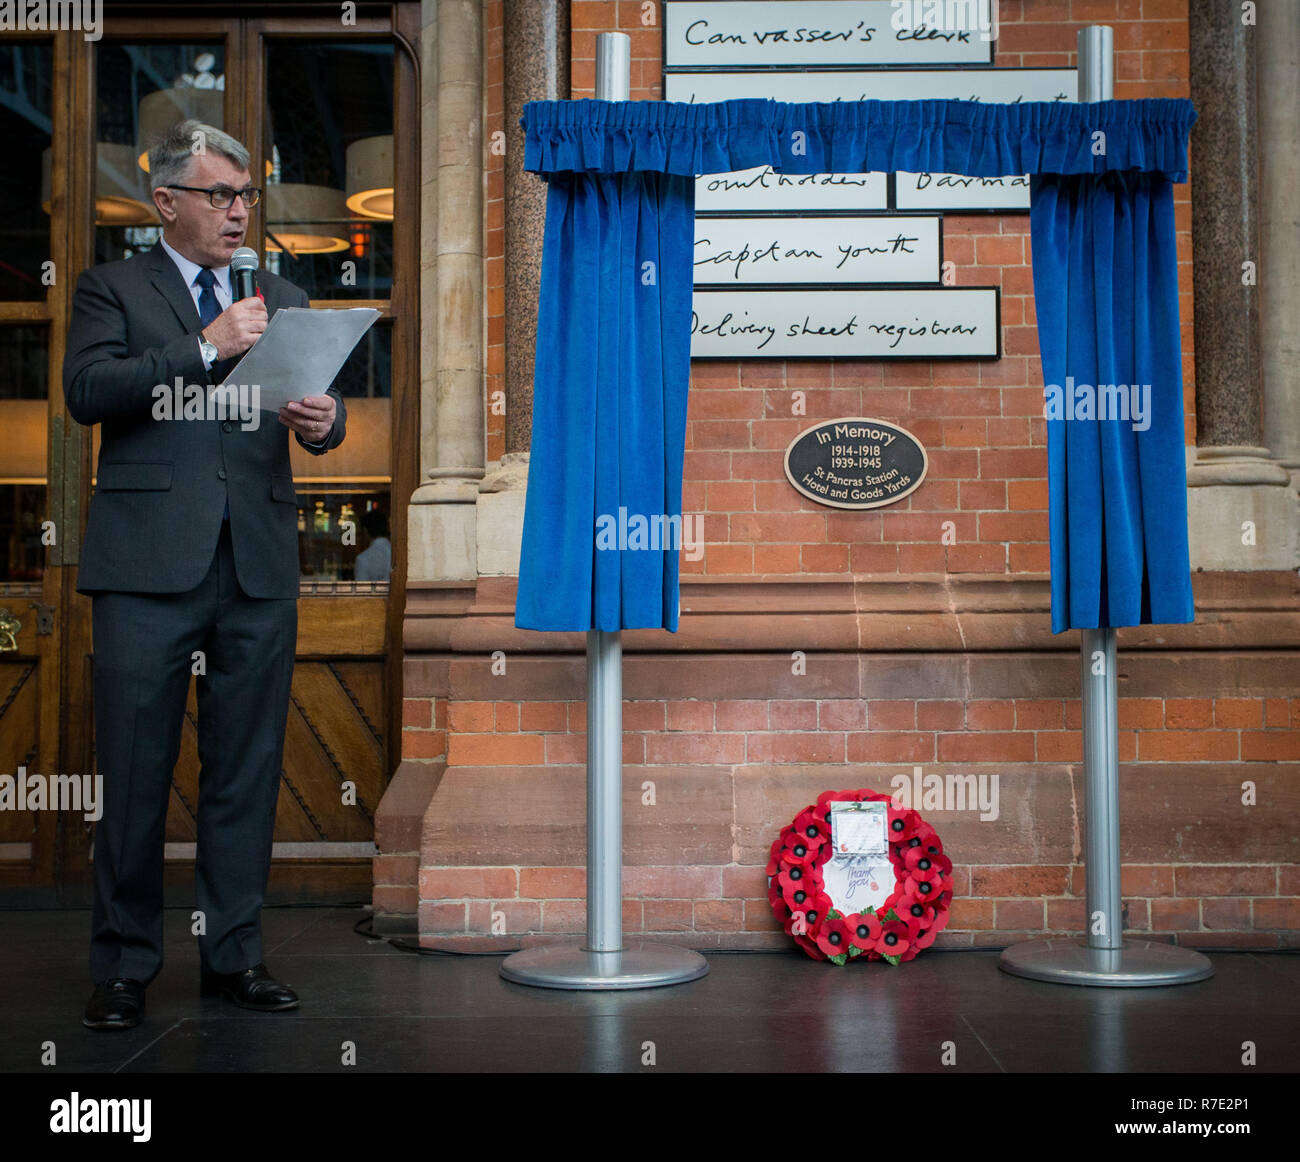 St. Pancras International reveals a permanent war memorial, the first ever in the station, on its 150th anniversary and the centenary of the end of World War I. The memorial is displayed on the station’s Grand Terrace, close to the location of bomb damage from two prominent air raids on the station.    The memorial was unveiled during a special service which included a reading from the station’s 15-year-old Poet Laureate and an exclusive performance from wartime choir the D-Day Darlings.  Featuring: Mick Cash, General Secretary of the National Union of Rail, Maritime and Transport Workers Wher Stock Photo